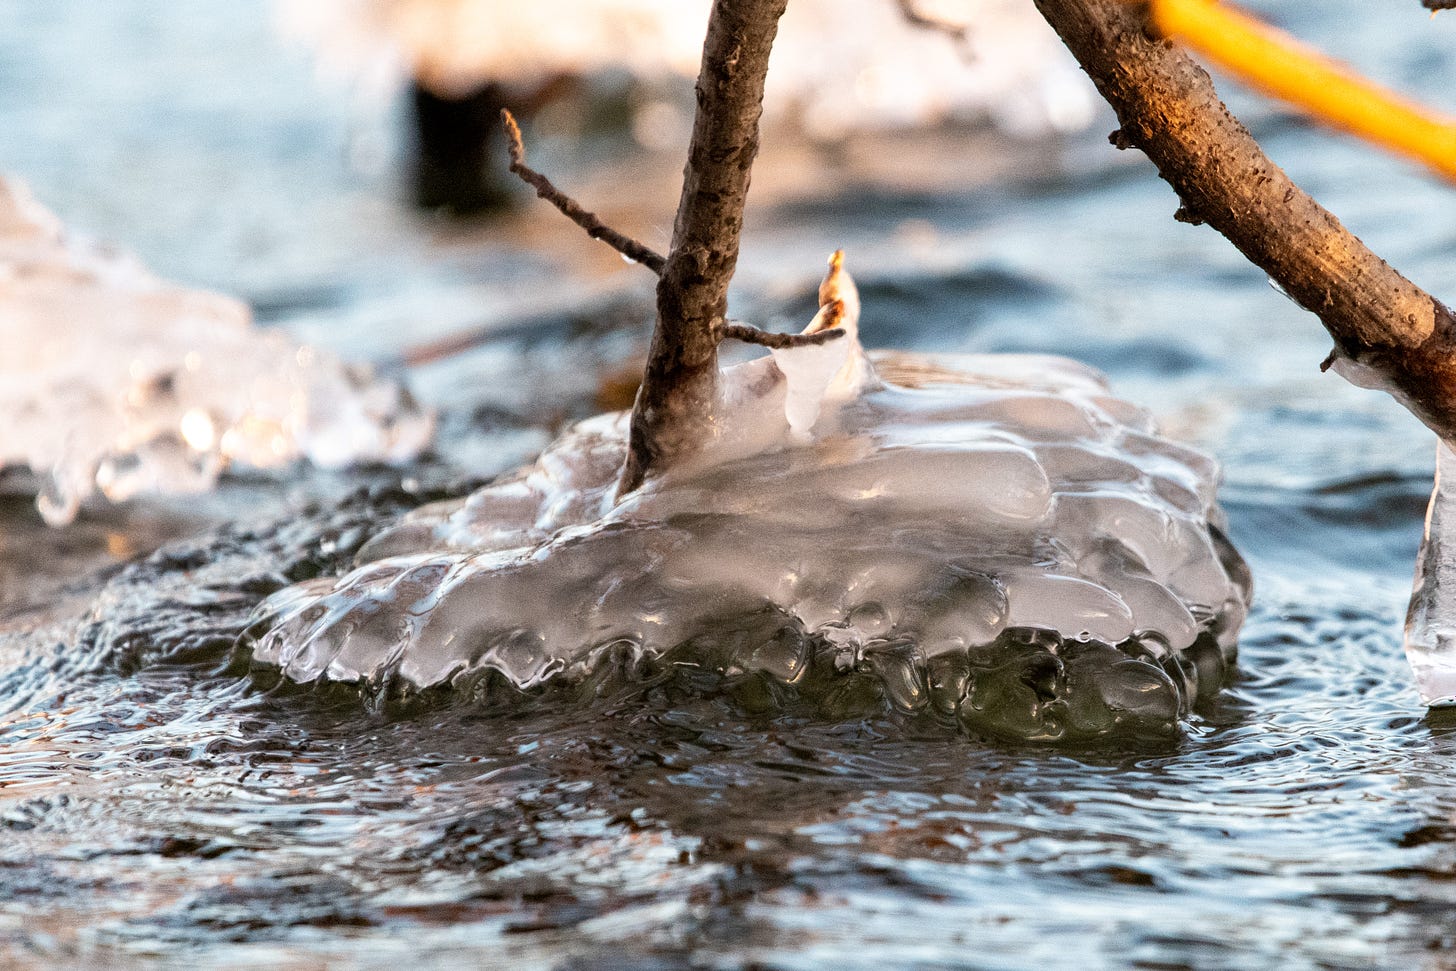 Ice, almost in the shape of a downward-facing open hand, that has formed around a branch that dips into a lake